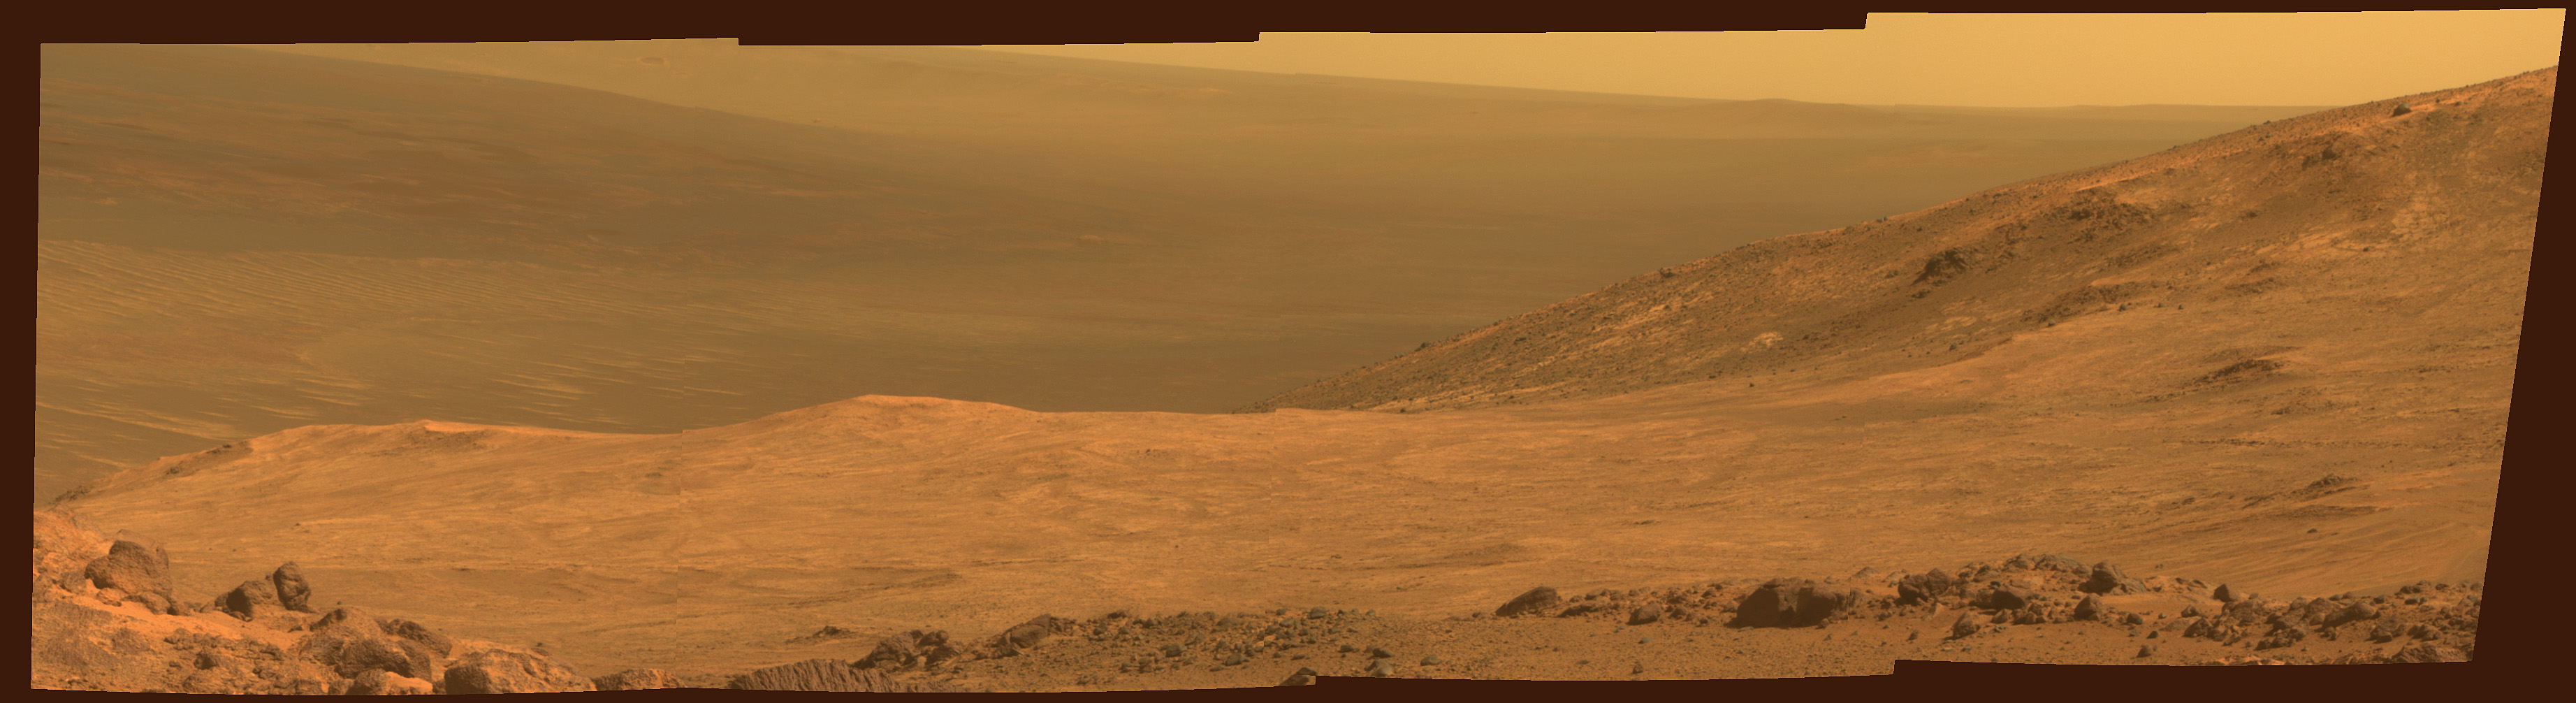 An overview of Marathon Valley, seen from Opportunity on March 13, as the rover was positioned at the Valley's northern side, along the western rim of Endeavour Crater. The scene spans from east, at left, to southeast. Image Credit: NASA/JPL-Caltech/Cornell Univ./Arizona State Univ.